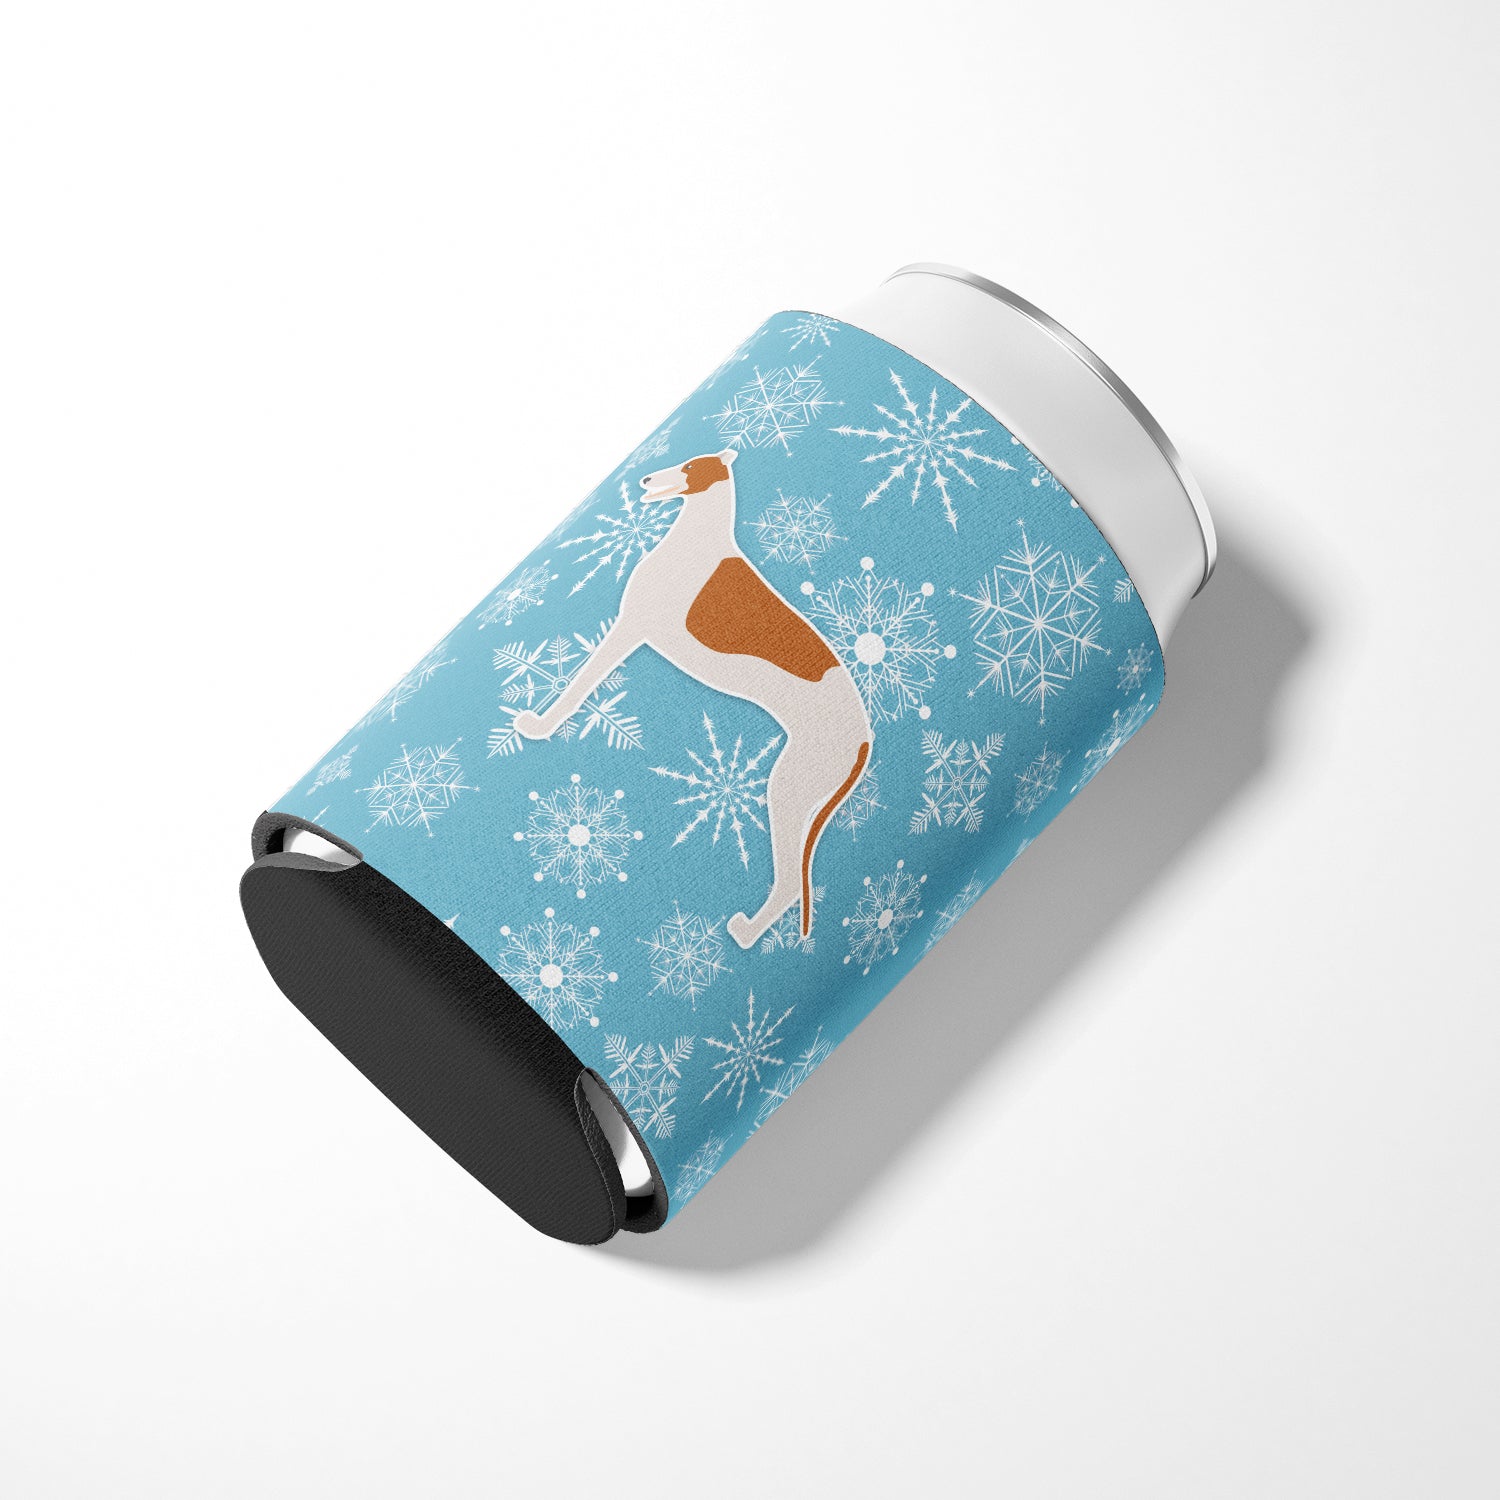 Winter Snowflake Greyhound Can or Bottle Hugger BB3505CC  the-store.com.